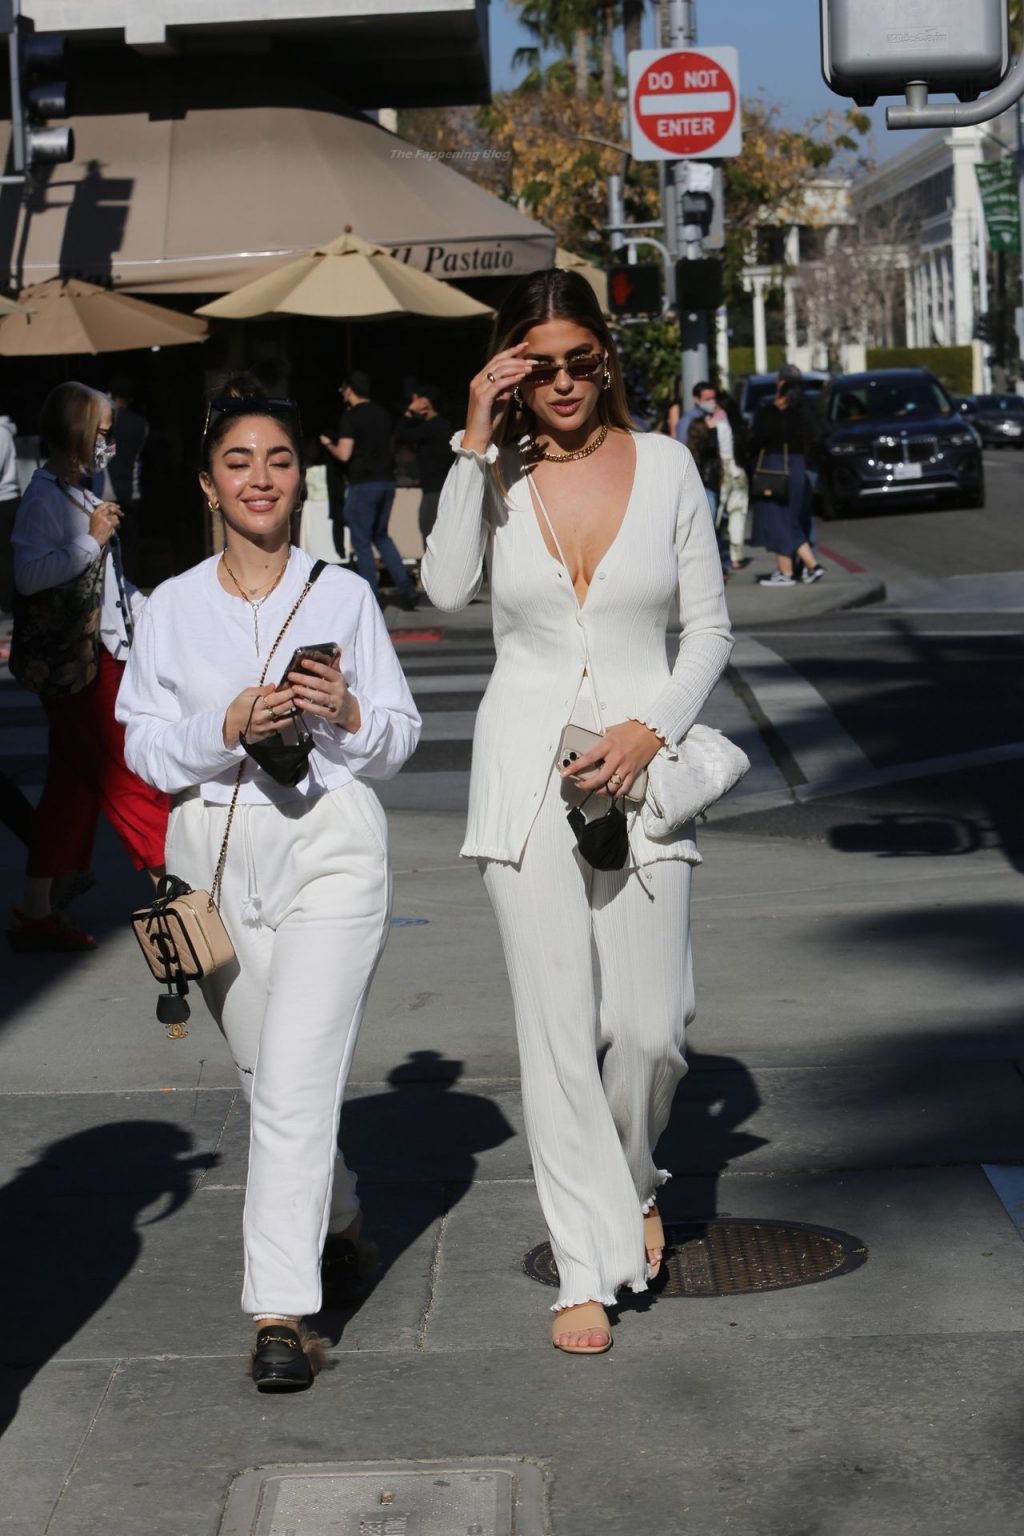 Kara Del Toro is Seen Braless in All-white While Out Shopping (33 Photos)